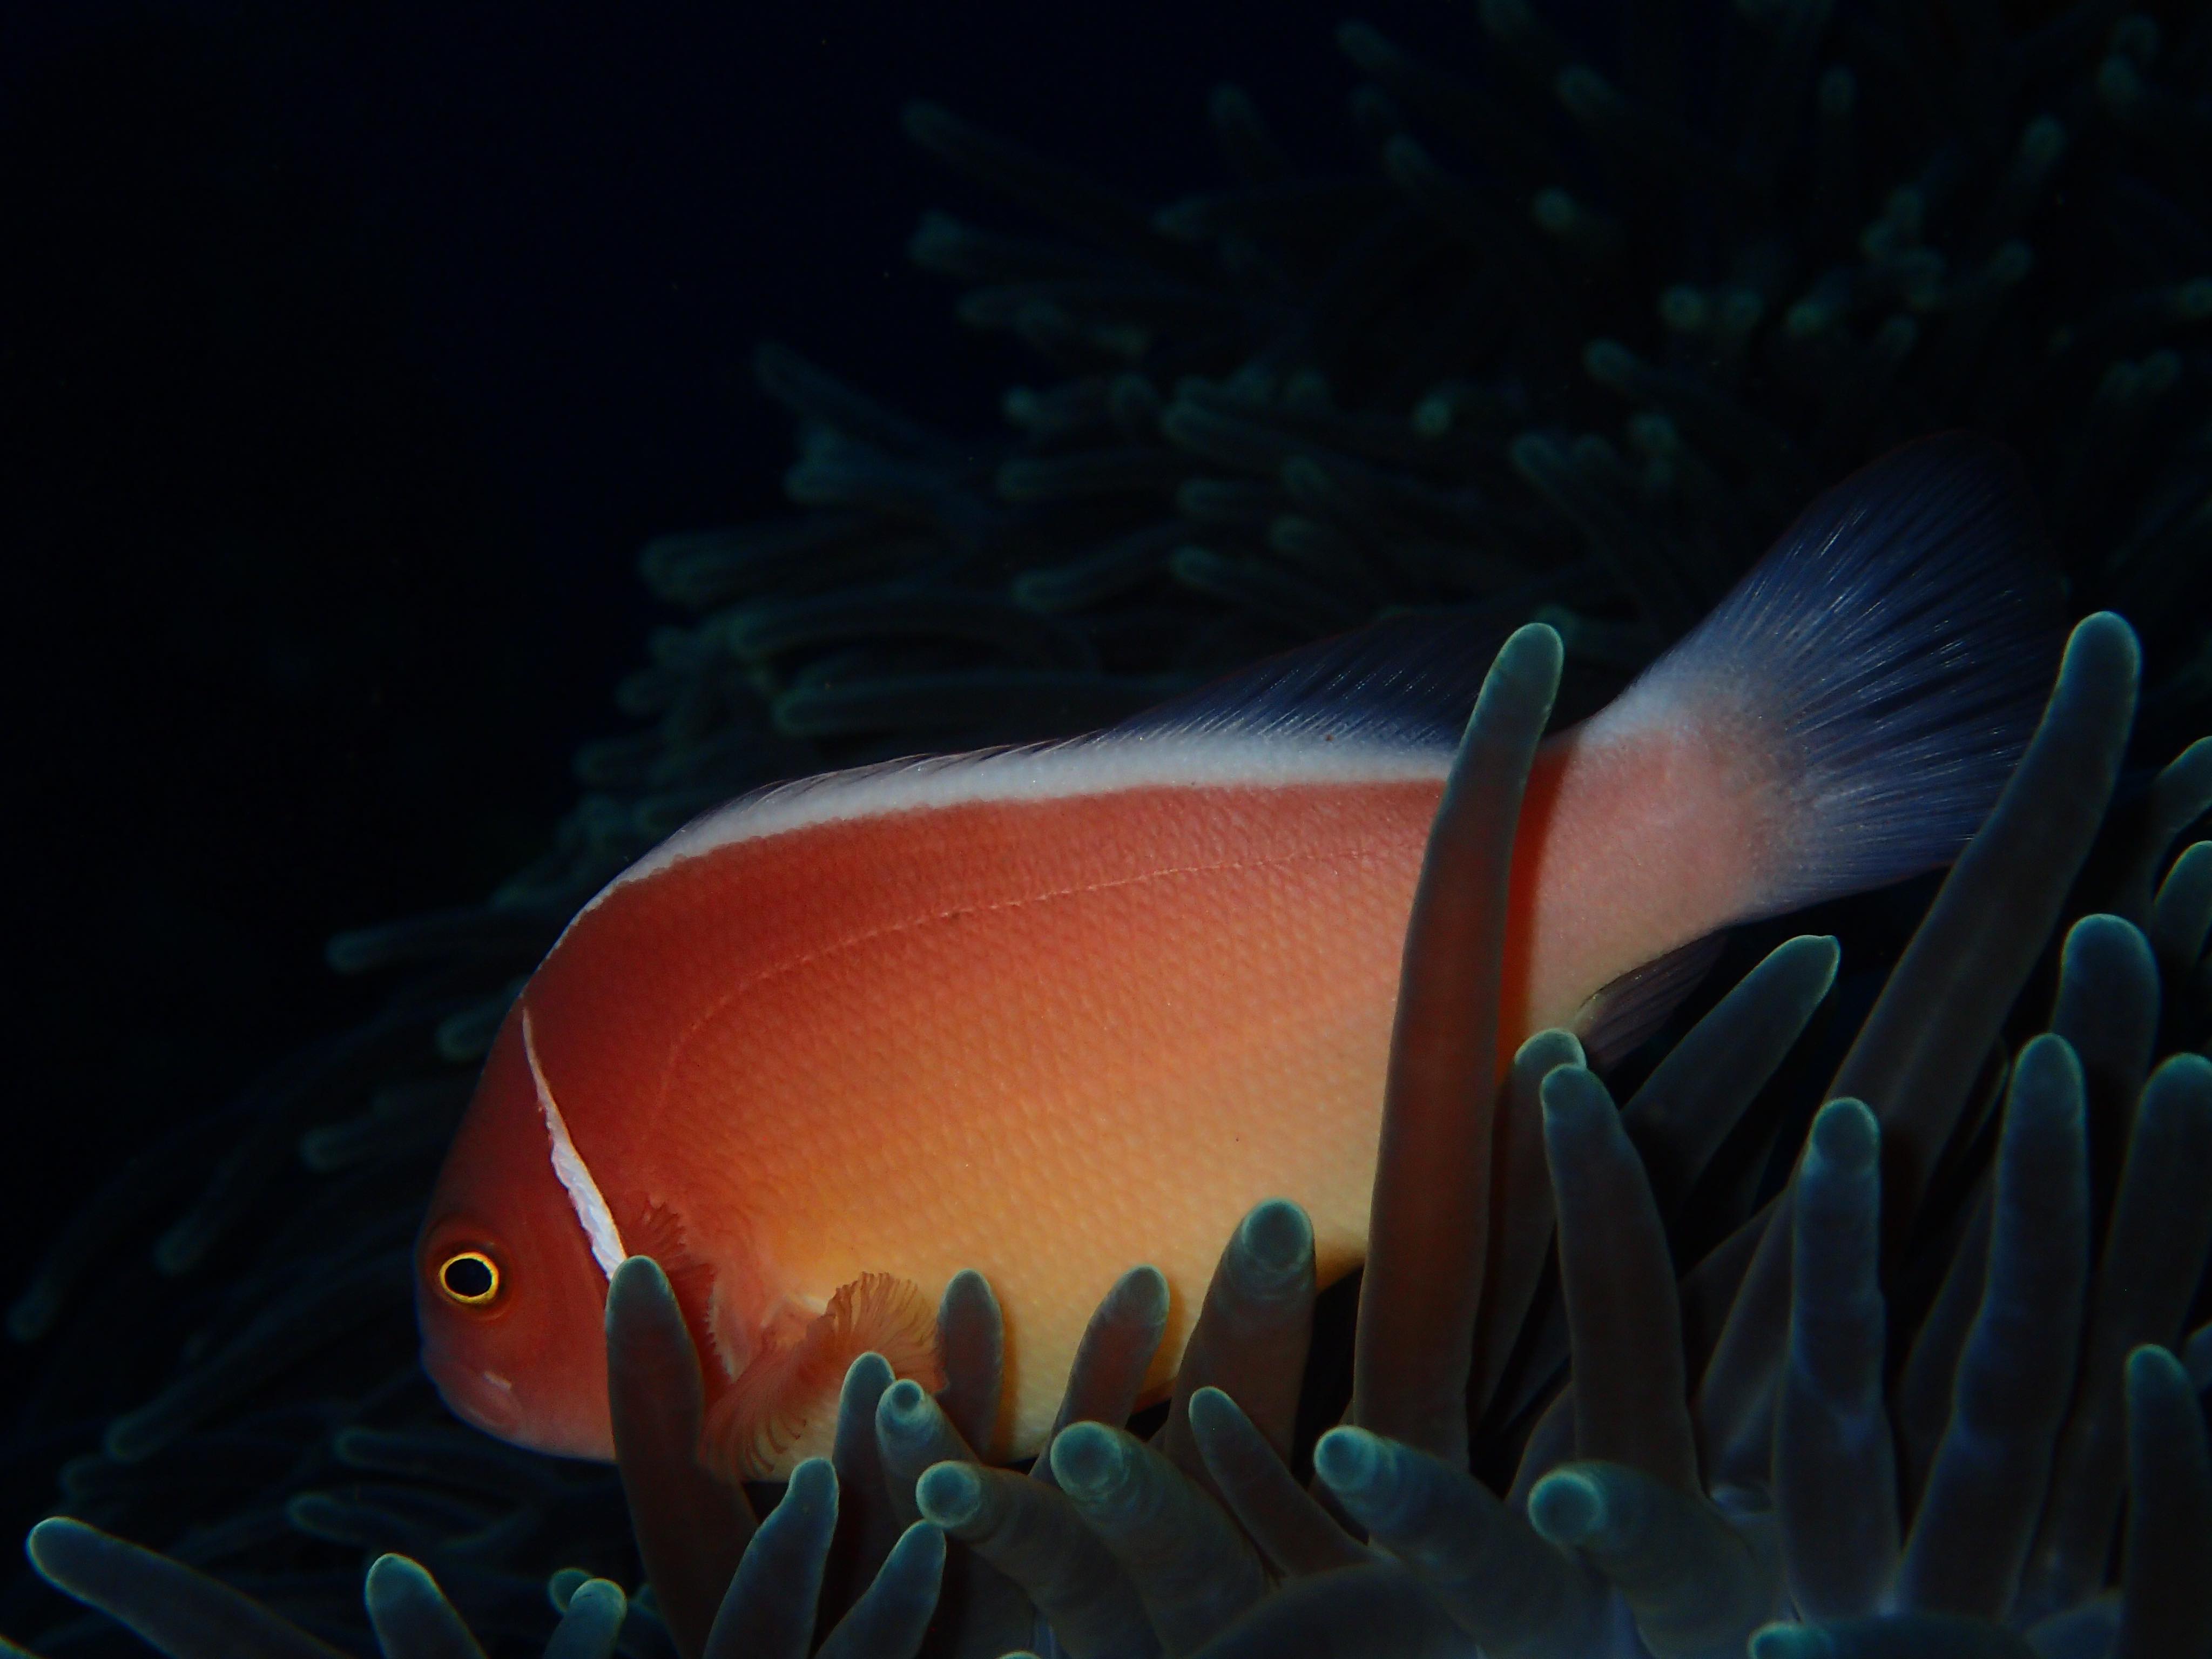 pink anemone fish photographed in Amed, Bali